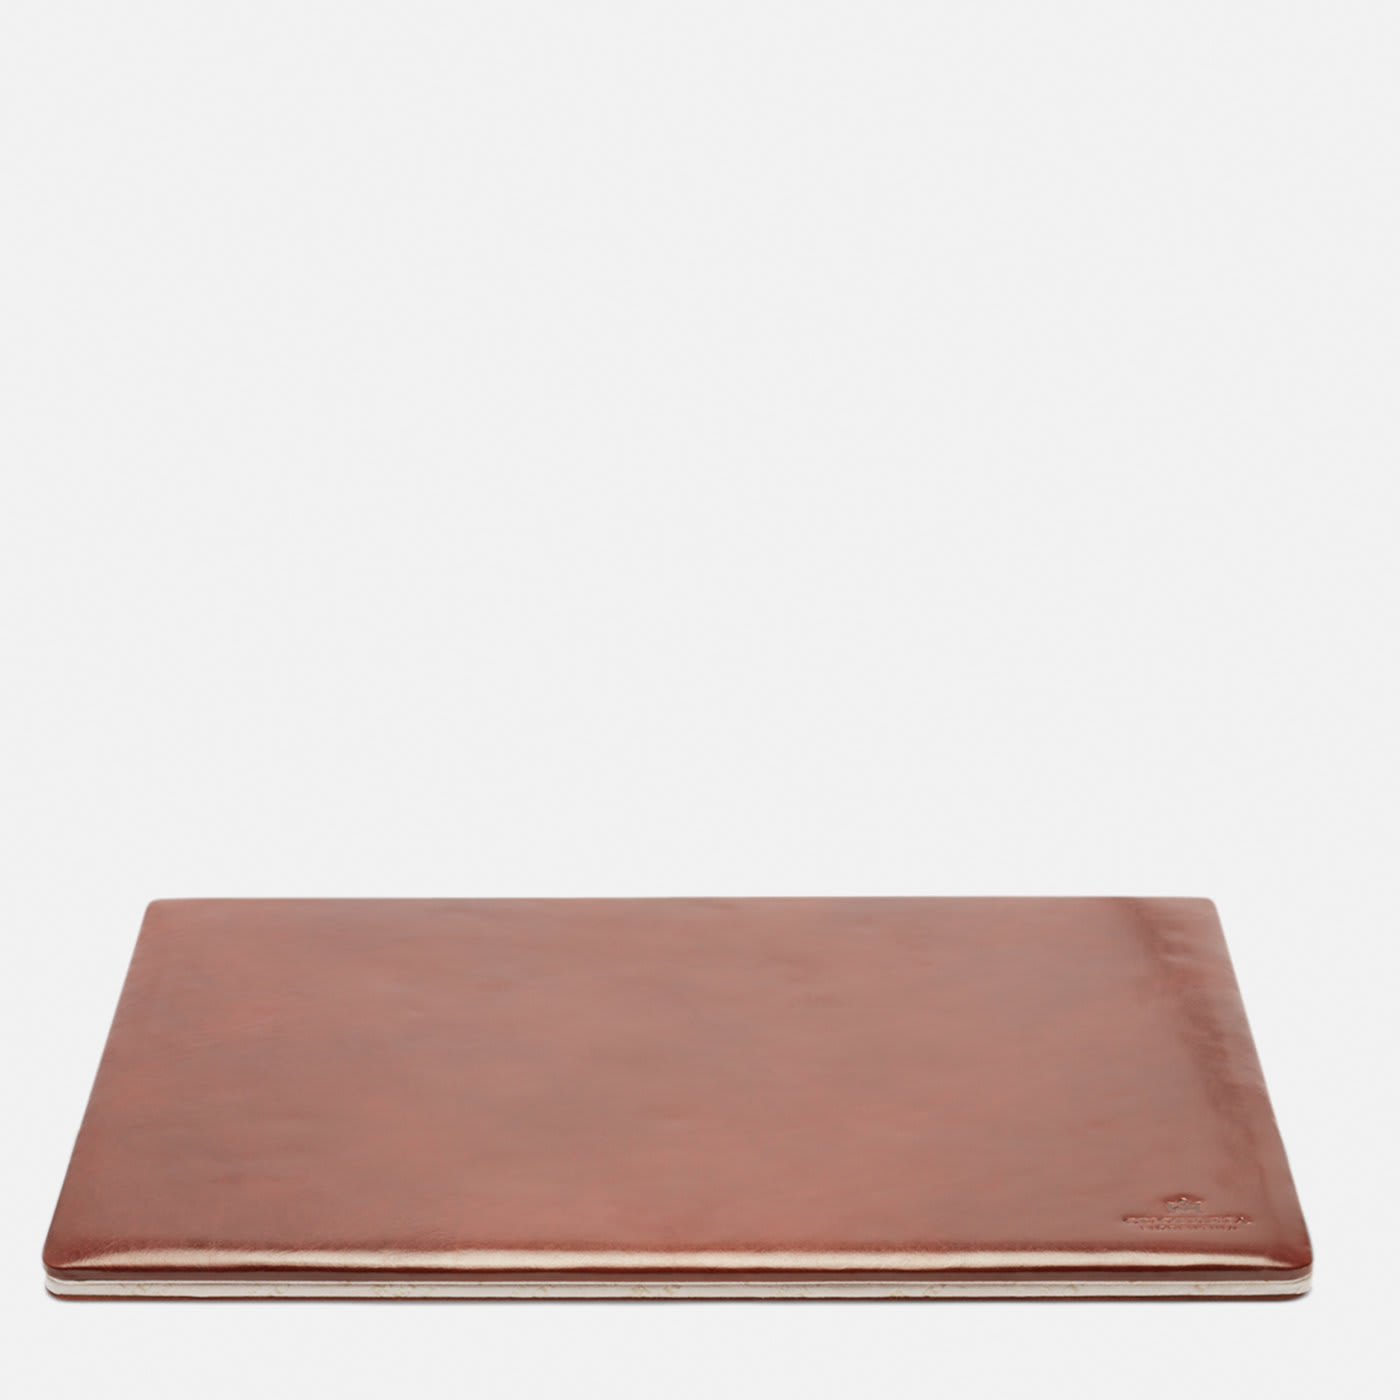 Warm & Color Brown Set of Desk Pad, Pen and Letter Holder - Cuoieria Fiorentina